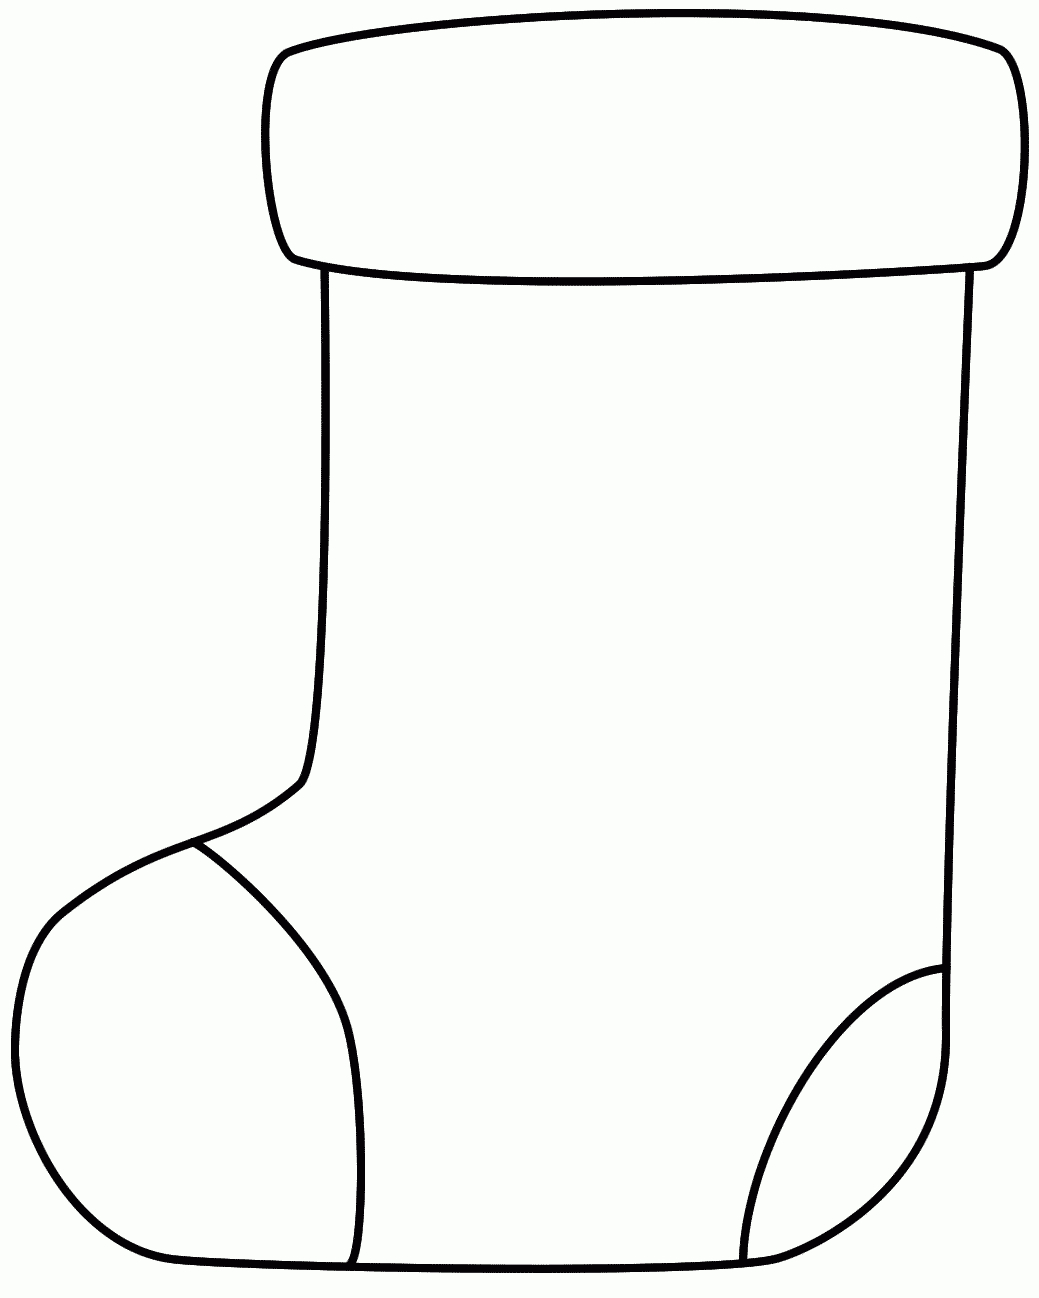 Christmas Stocking Coloring Page | Coloring Pages | Preschool - Christmas Stocking Template Printable Free